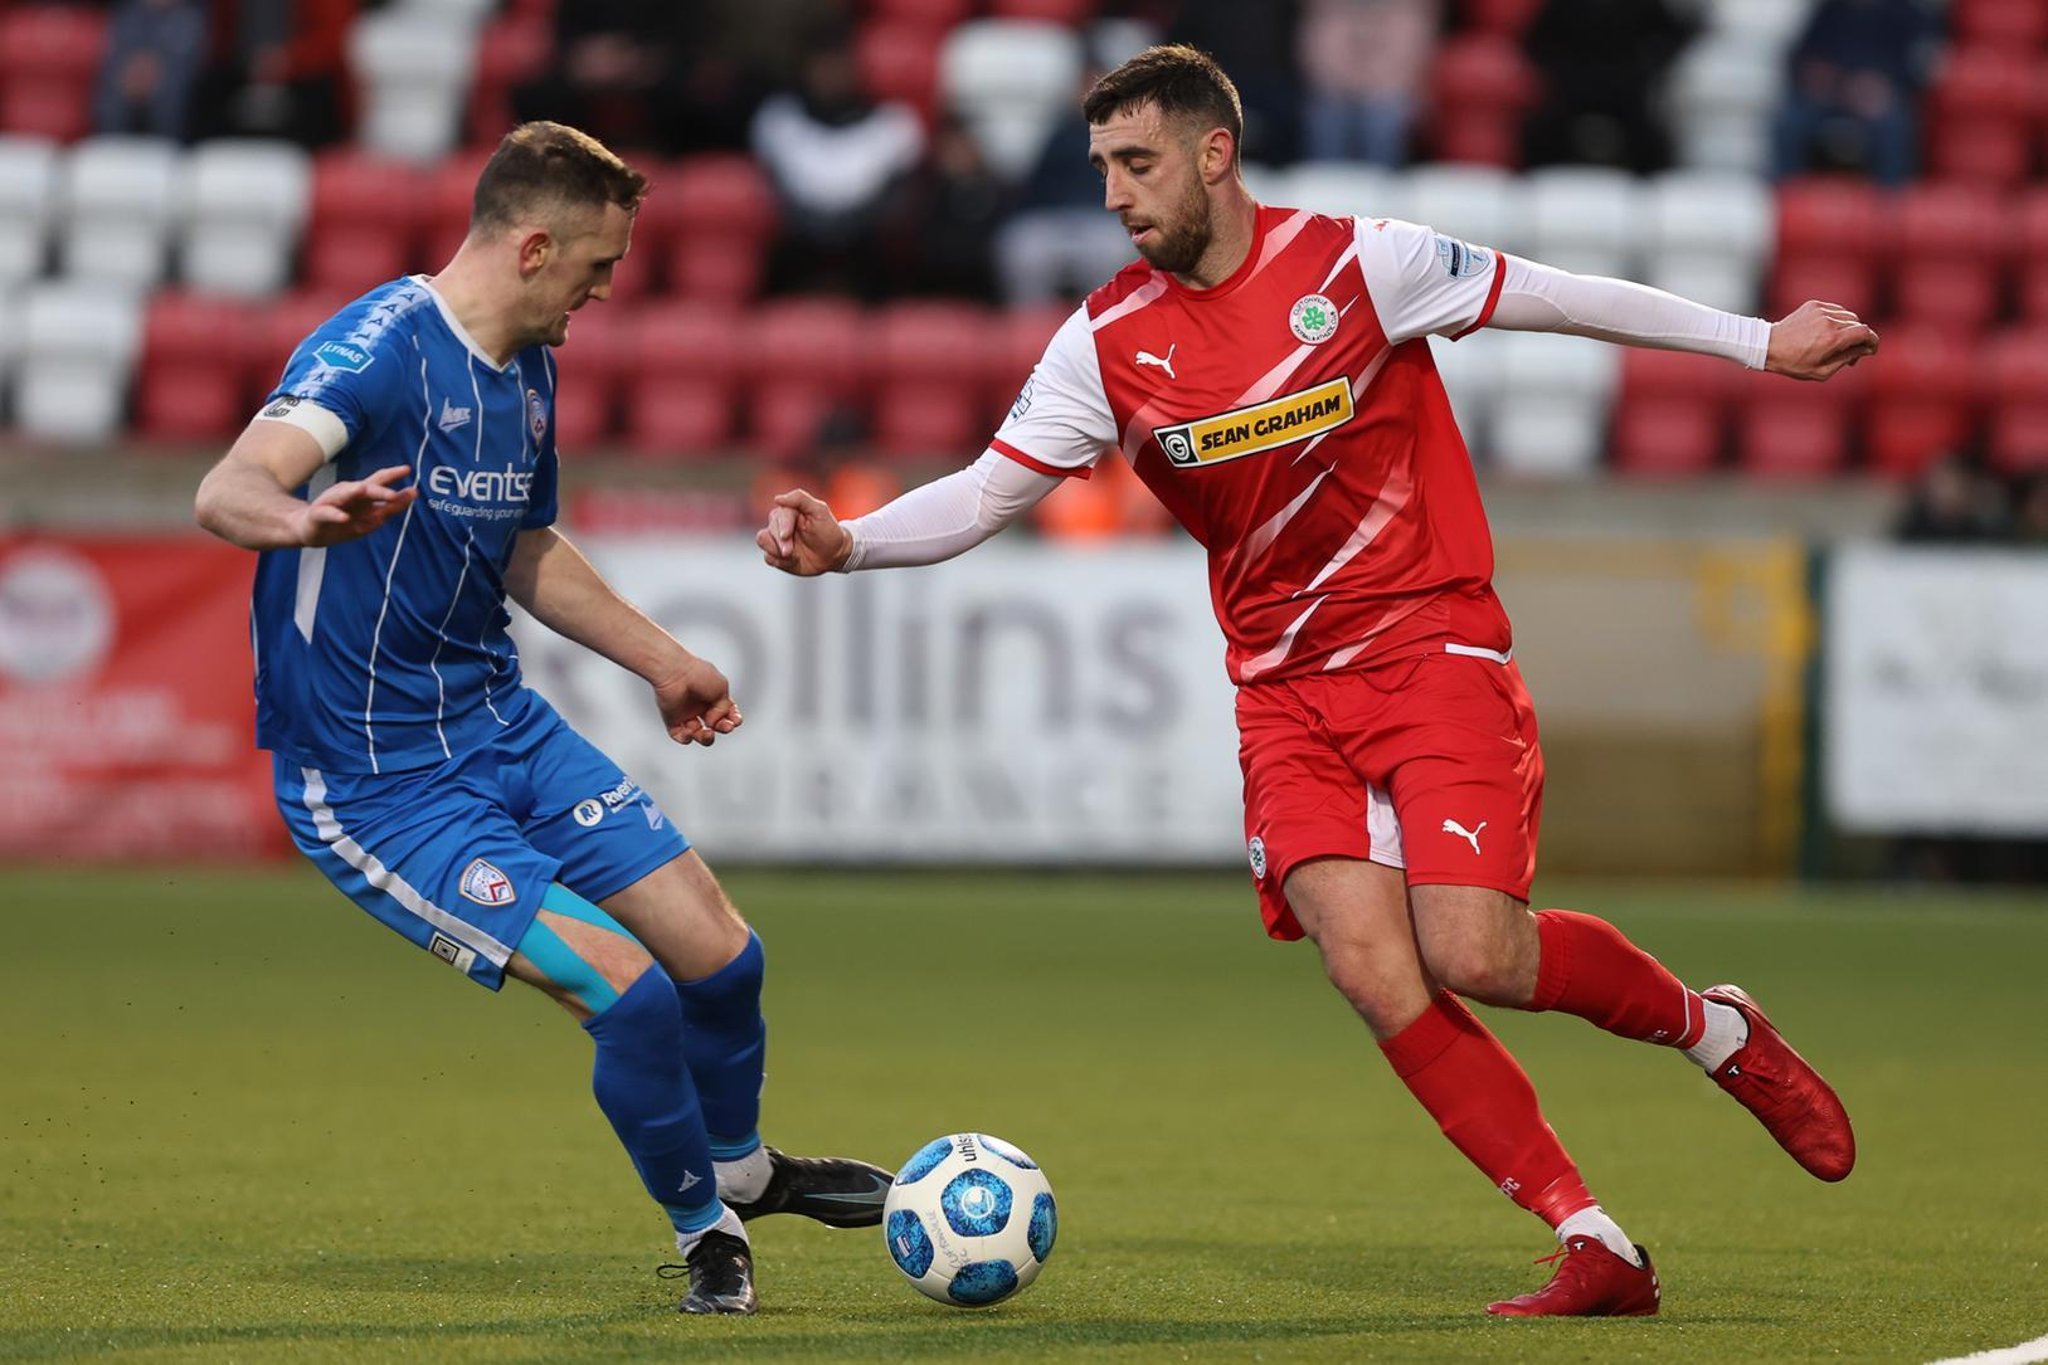 Cliftonville winning the league would be a football miracle says Paddy McLaughlin